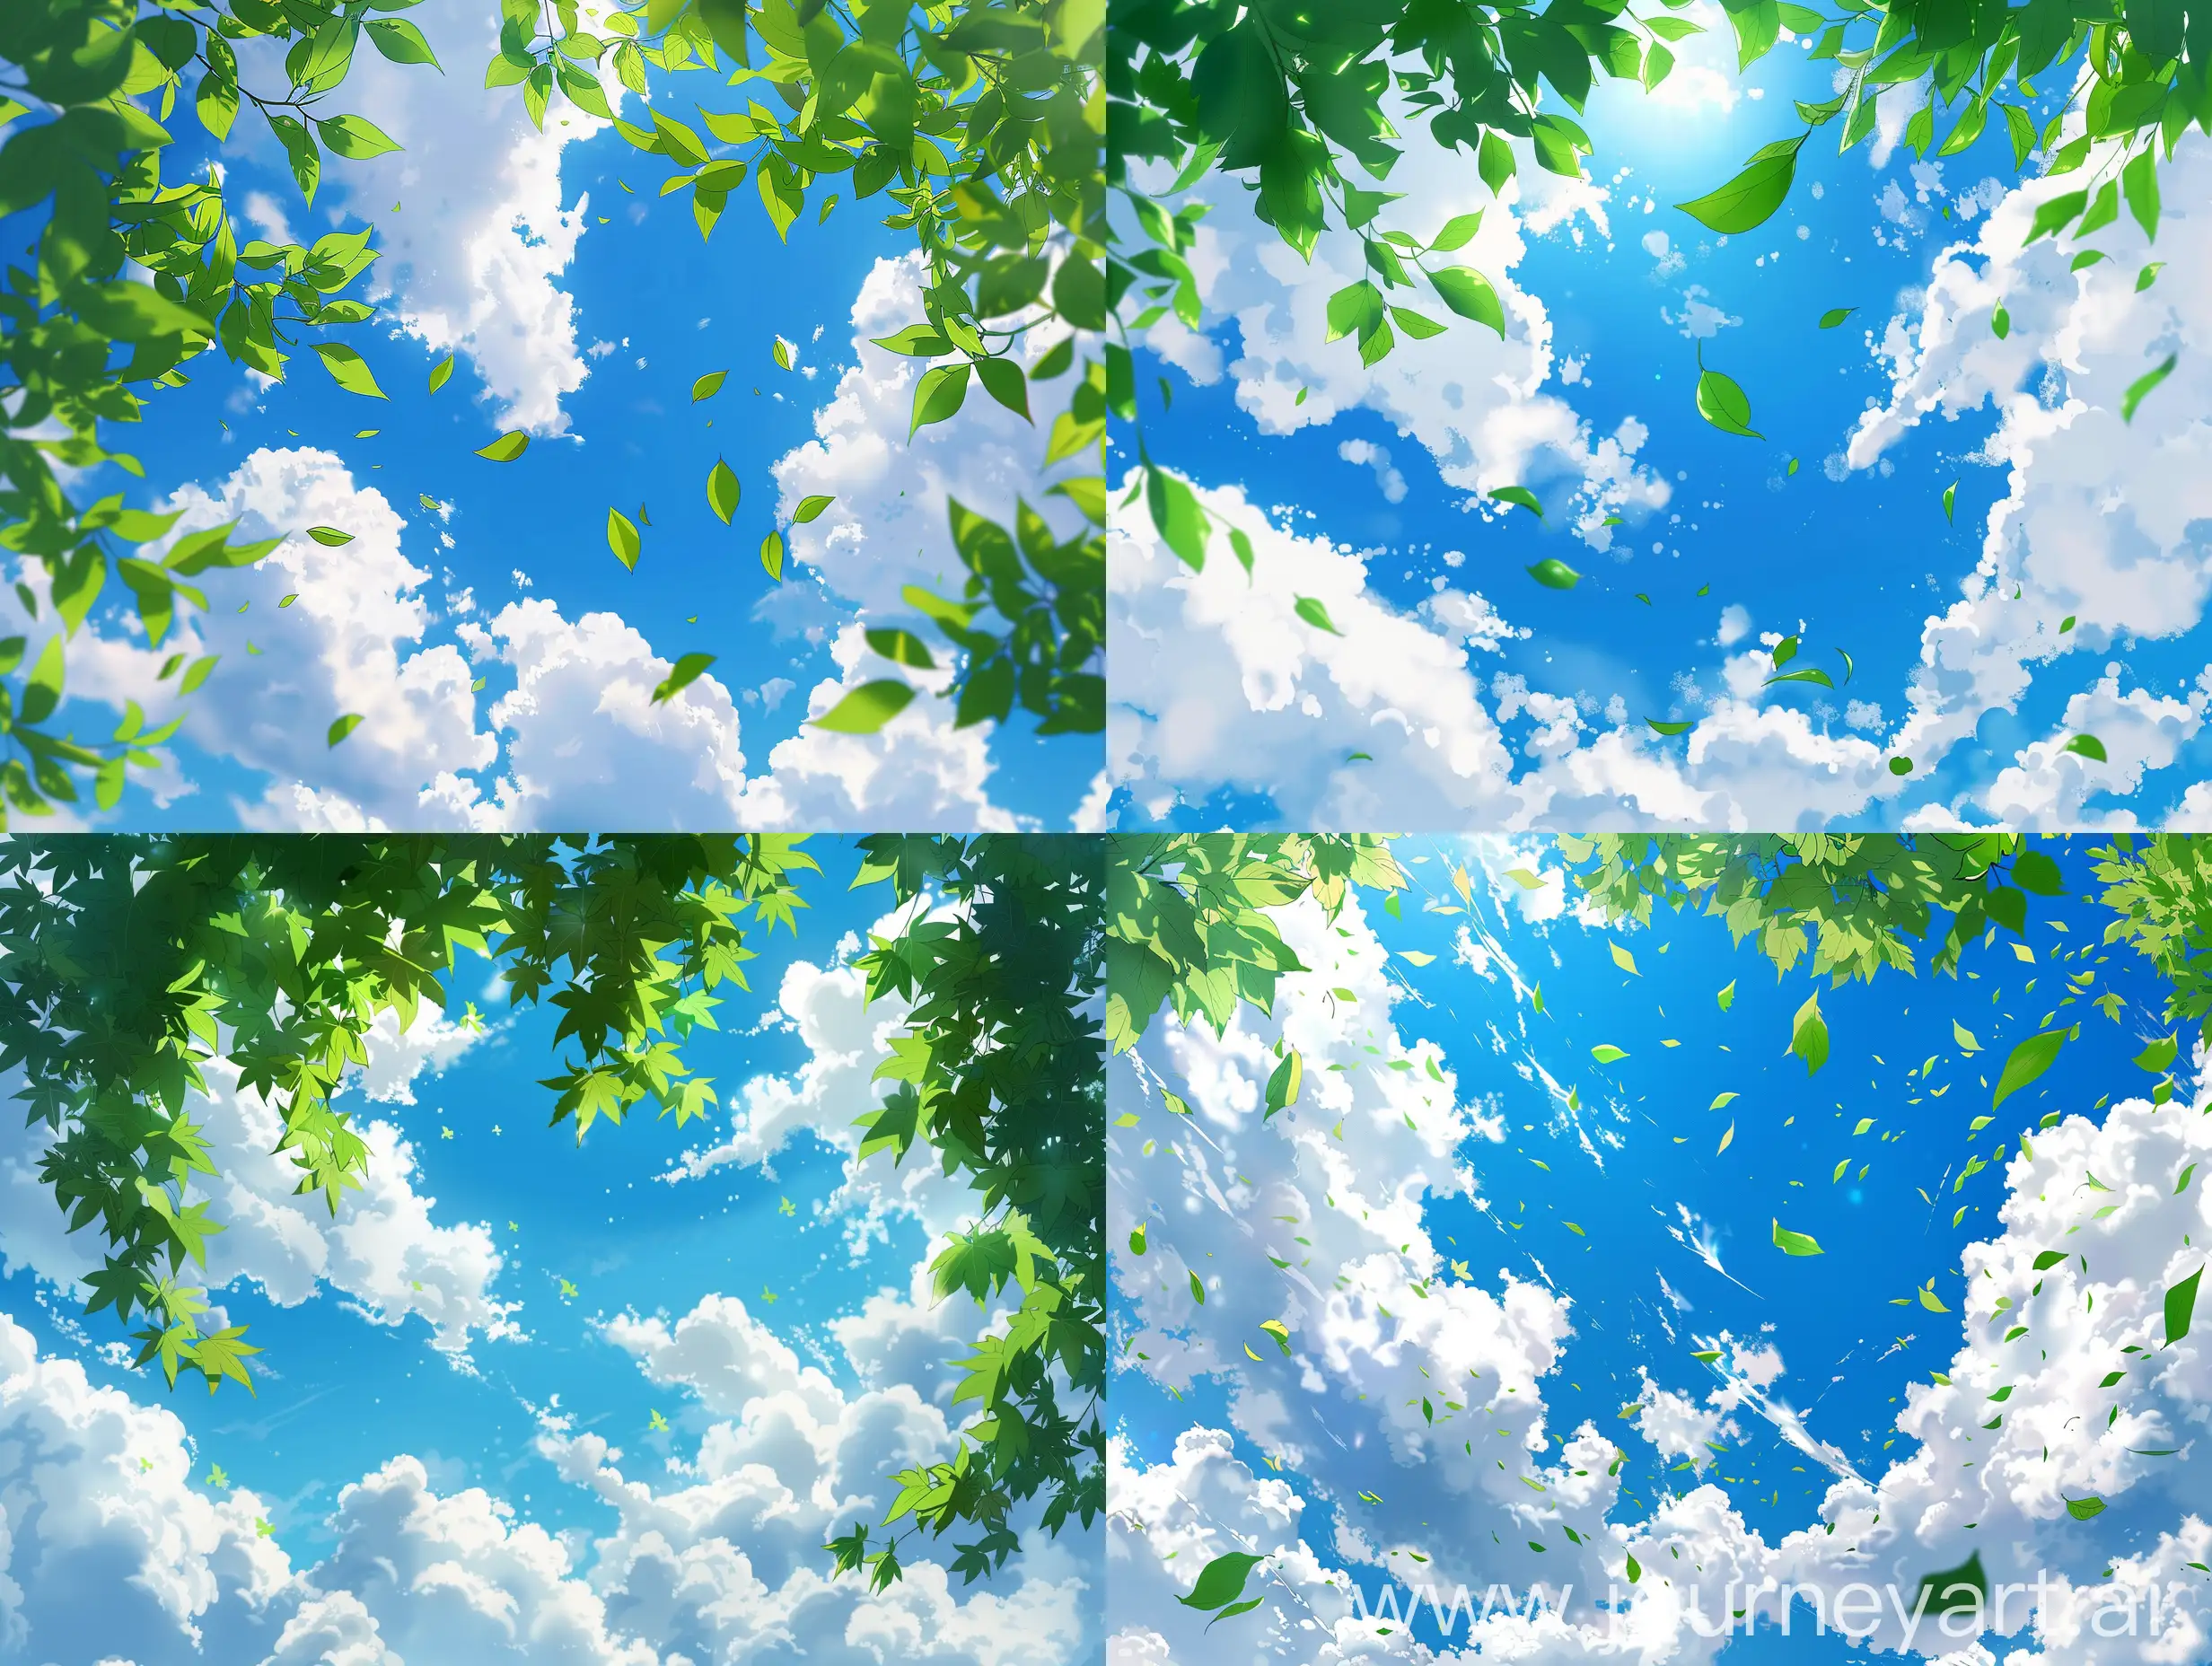 Graceful-Anime-Landscape-Whimsical-Green-Leaves-Dancing-in-the-Blue-Sky